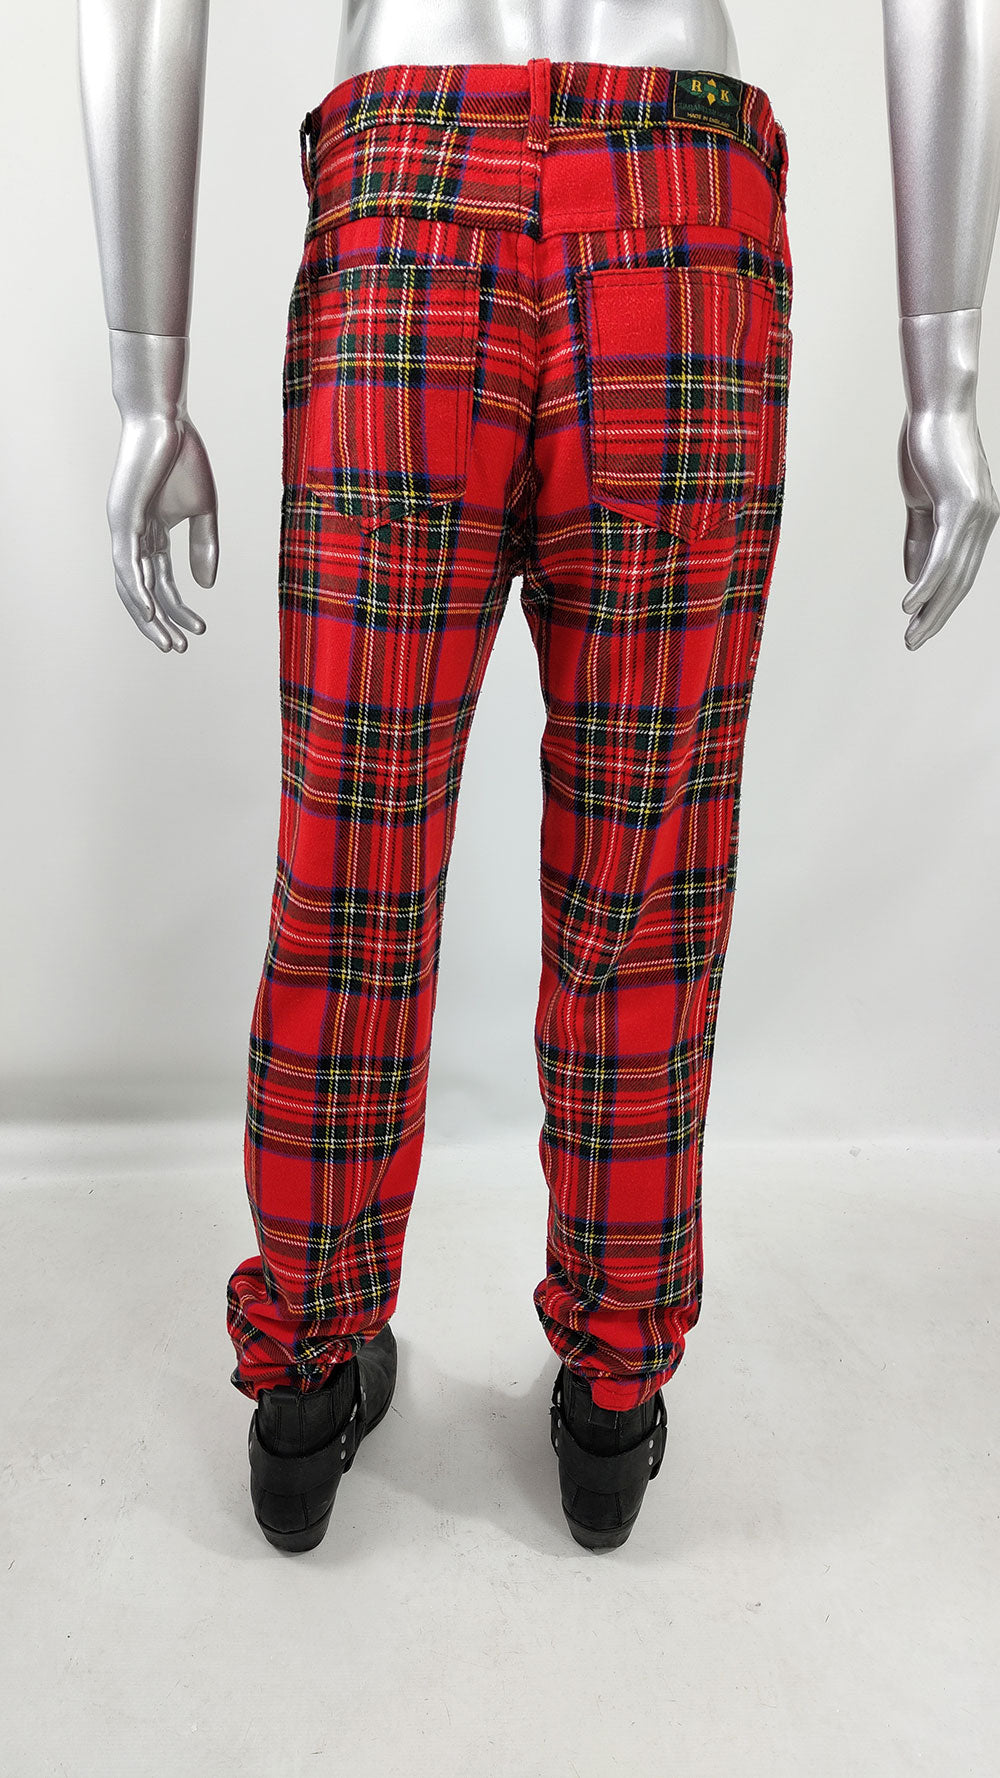 A vintage pair of red and green checked mens punk trousers from the 1980s.